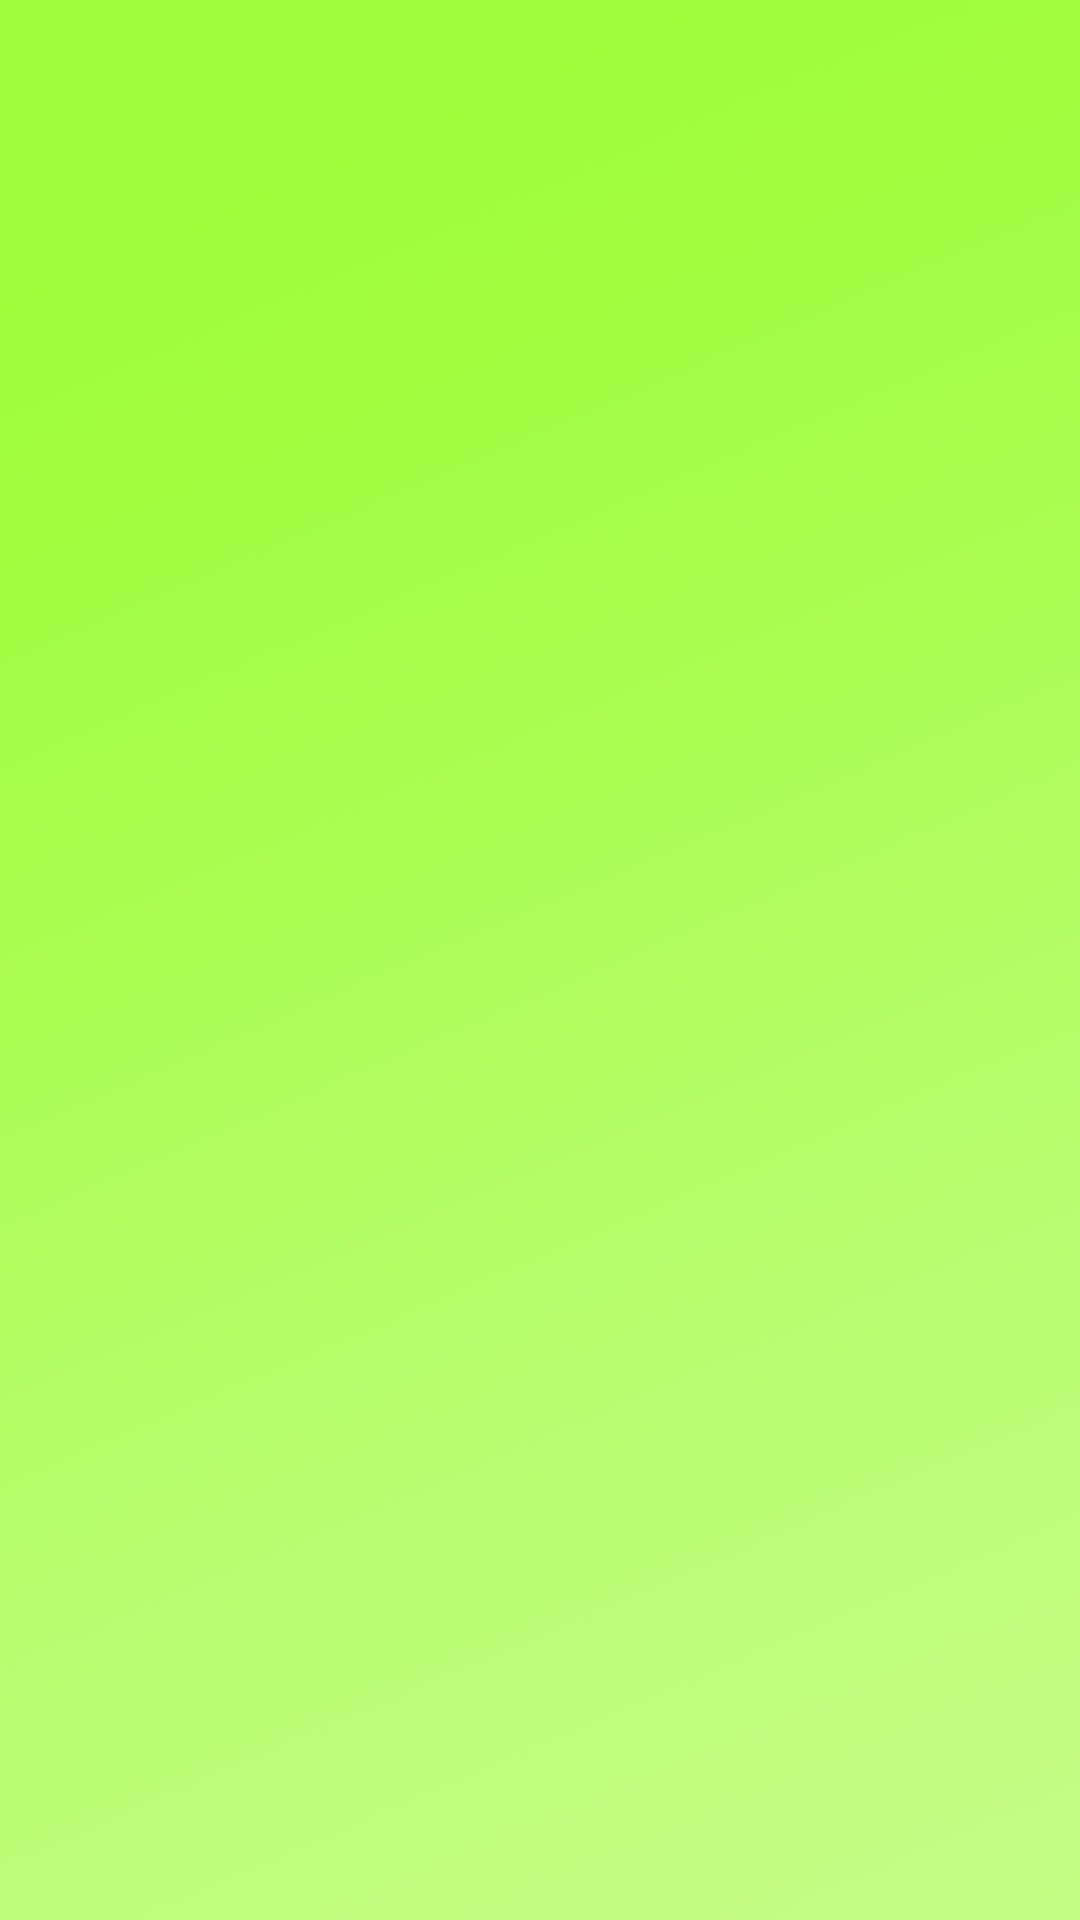 lime green color wallpaper